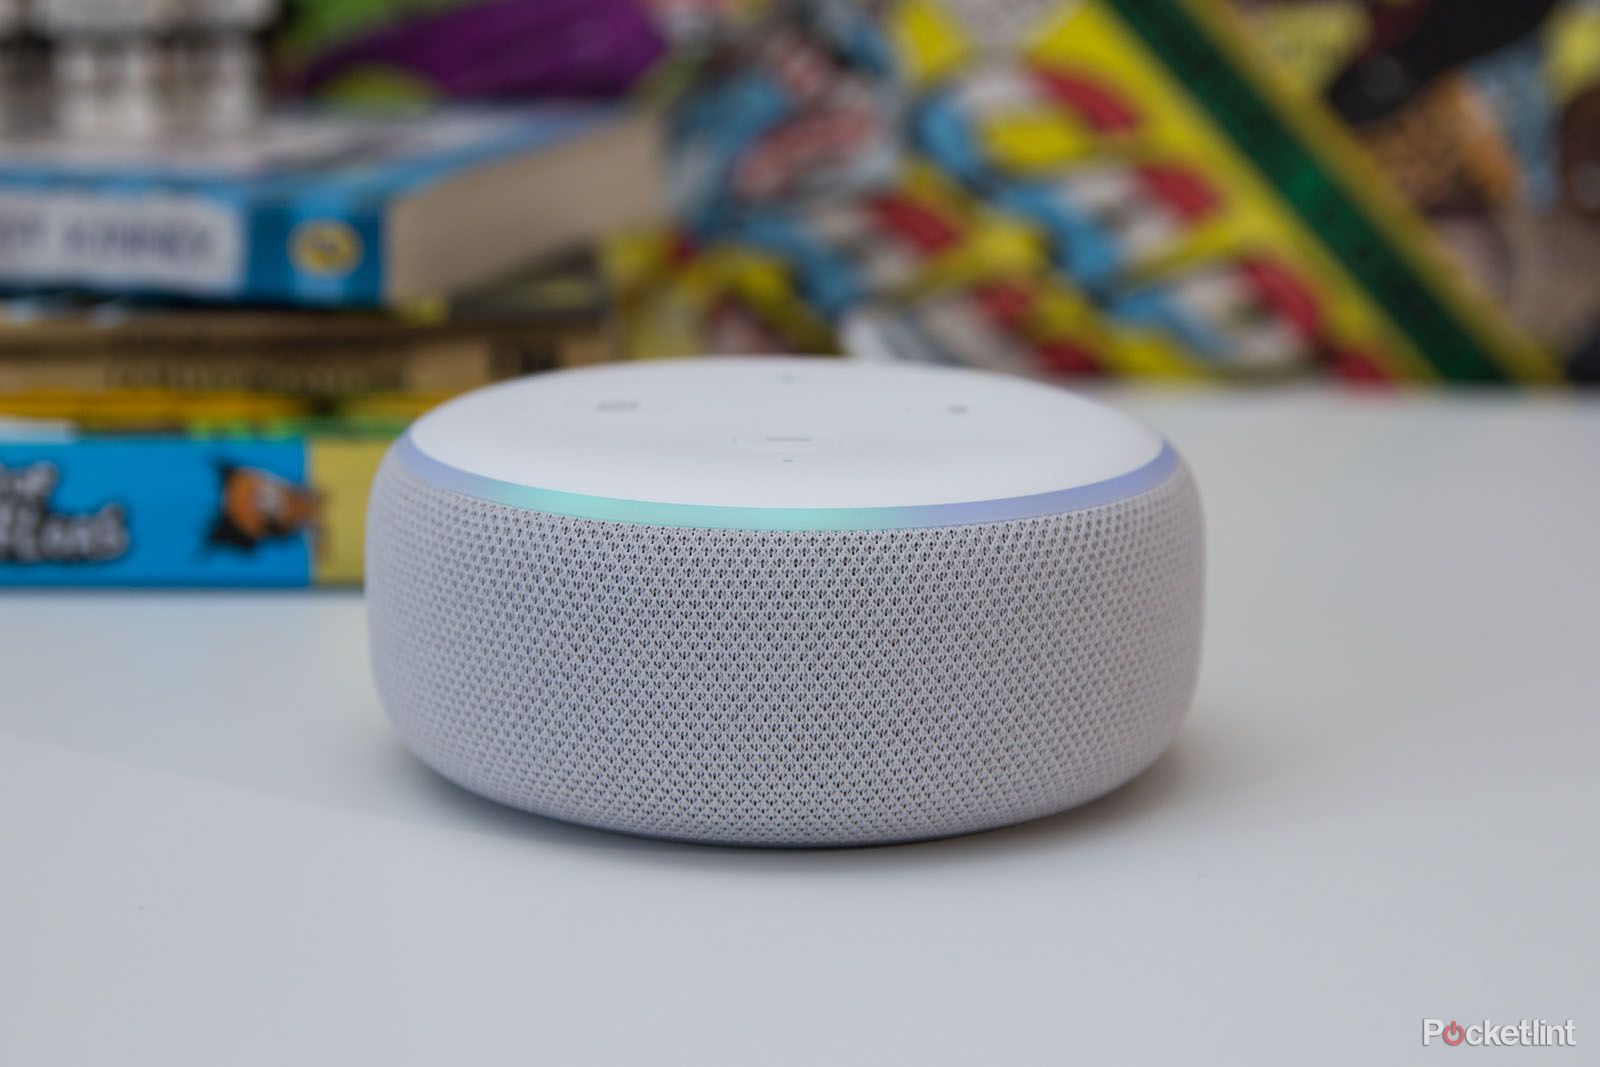 Alexa will soon answer your questions with information provided by other users image 1